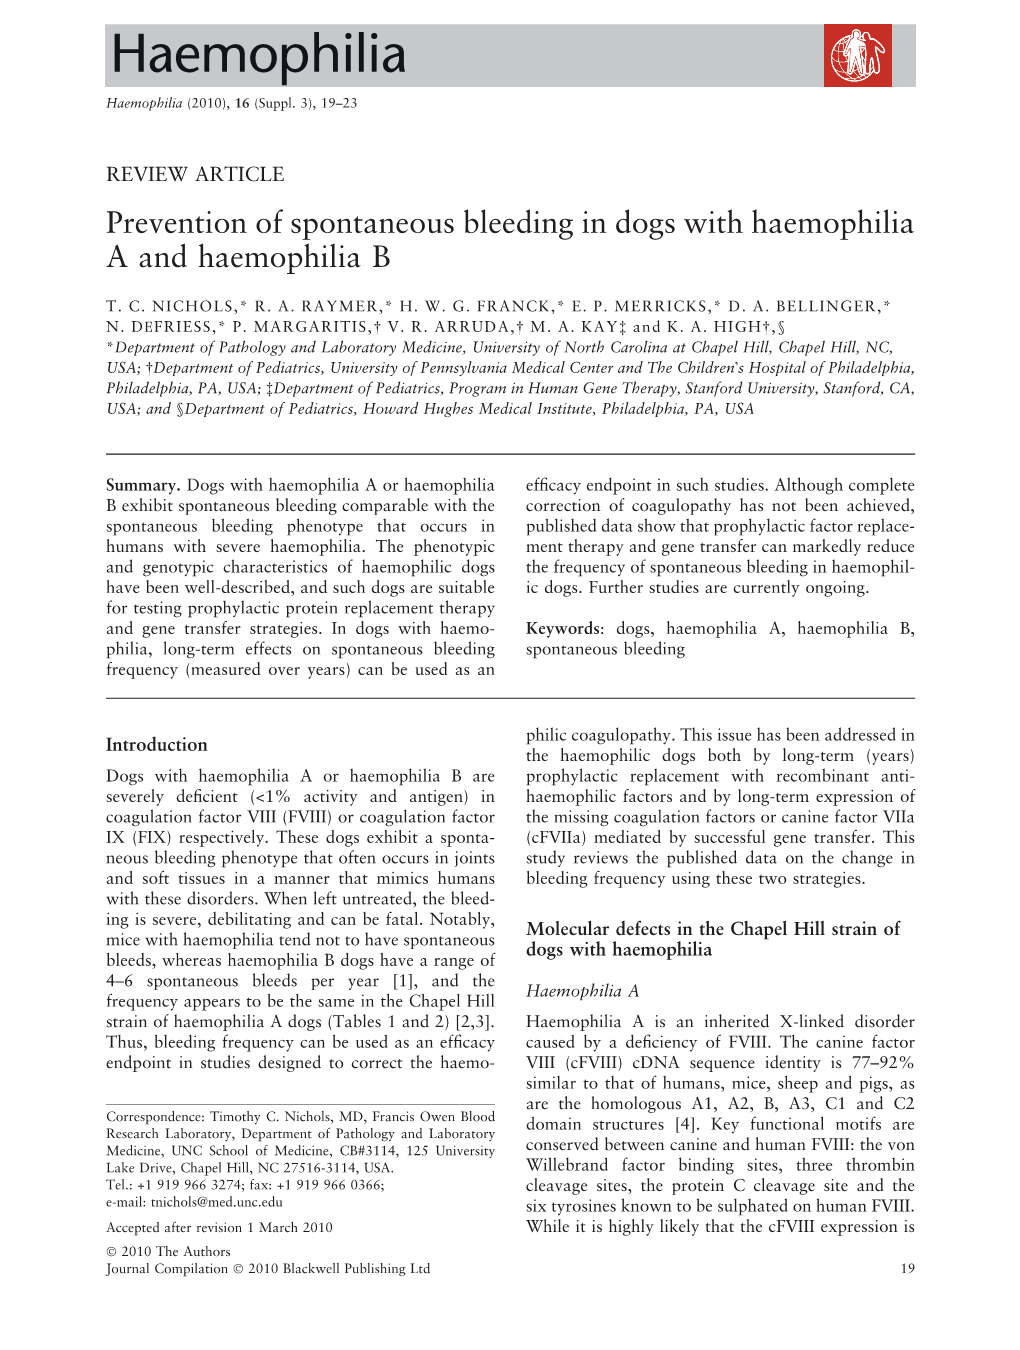 Prevention of Spontaneous Bleeding in Dogs with Haemophilia a and Haemophilia B